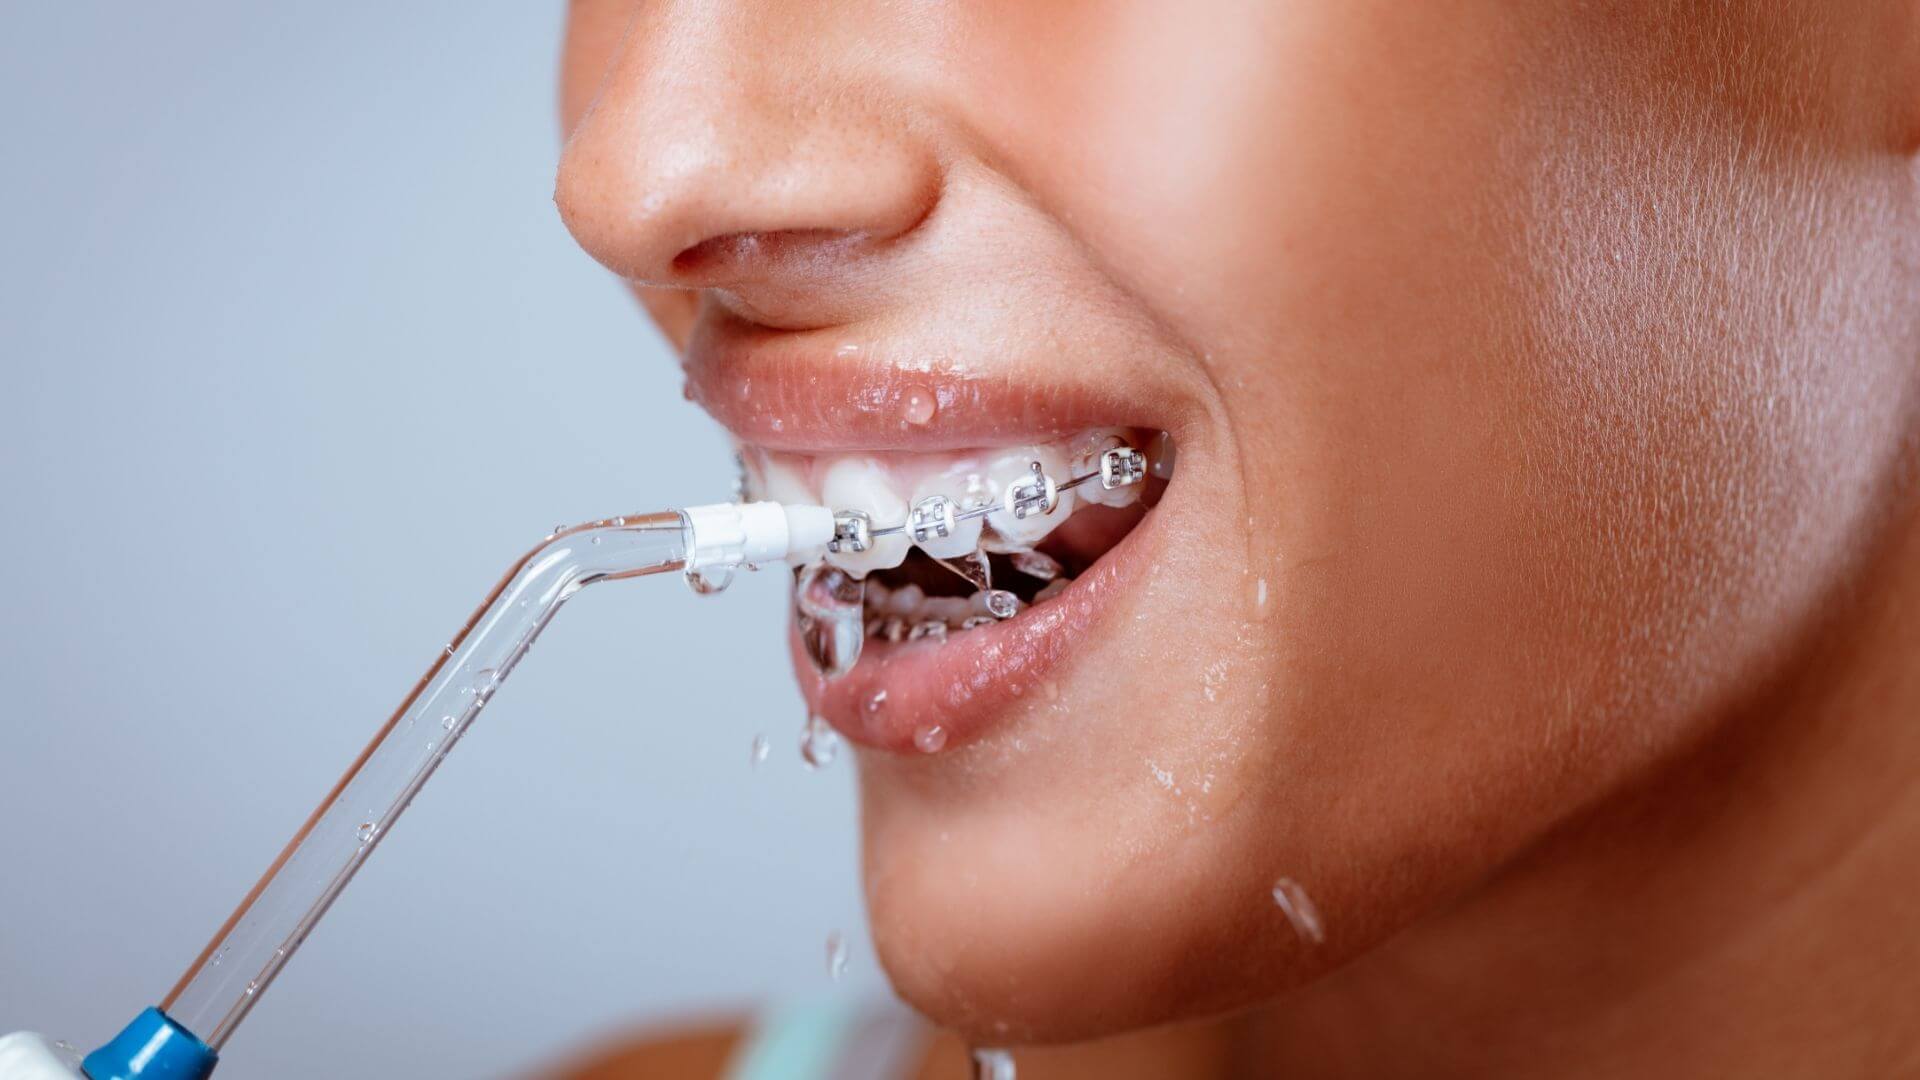 Should You Use a Water Flosser?